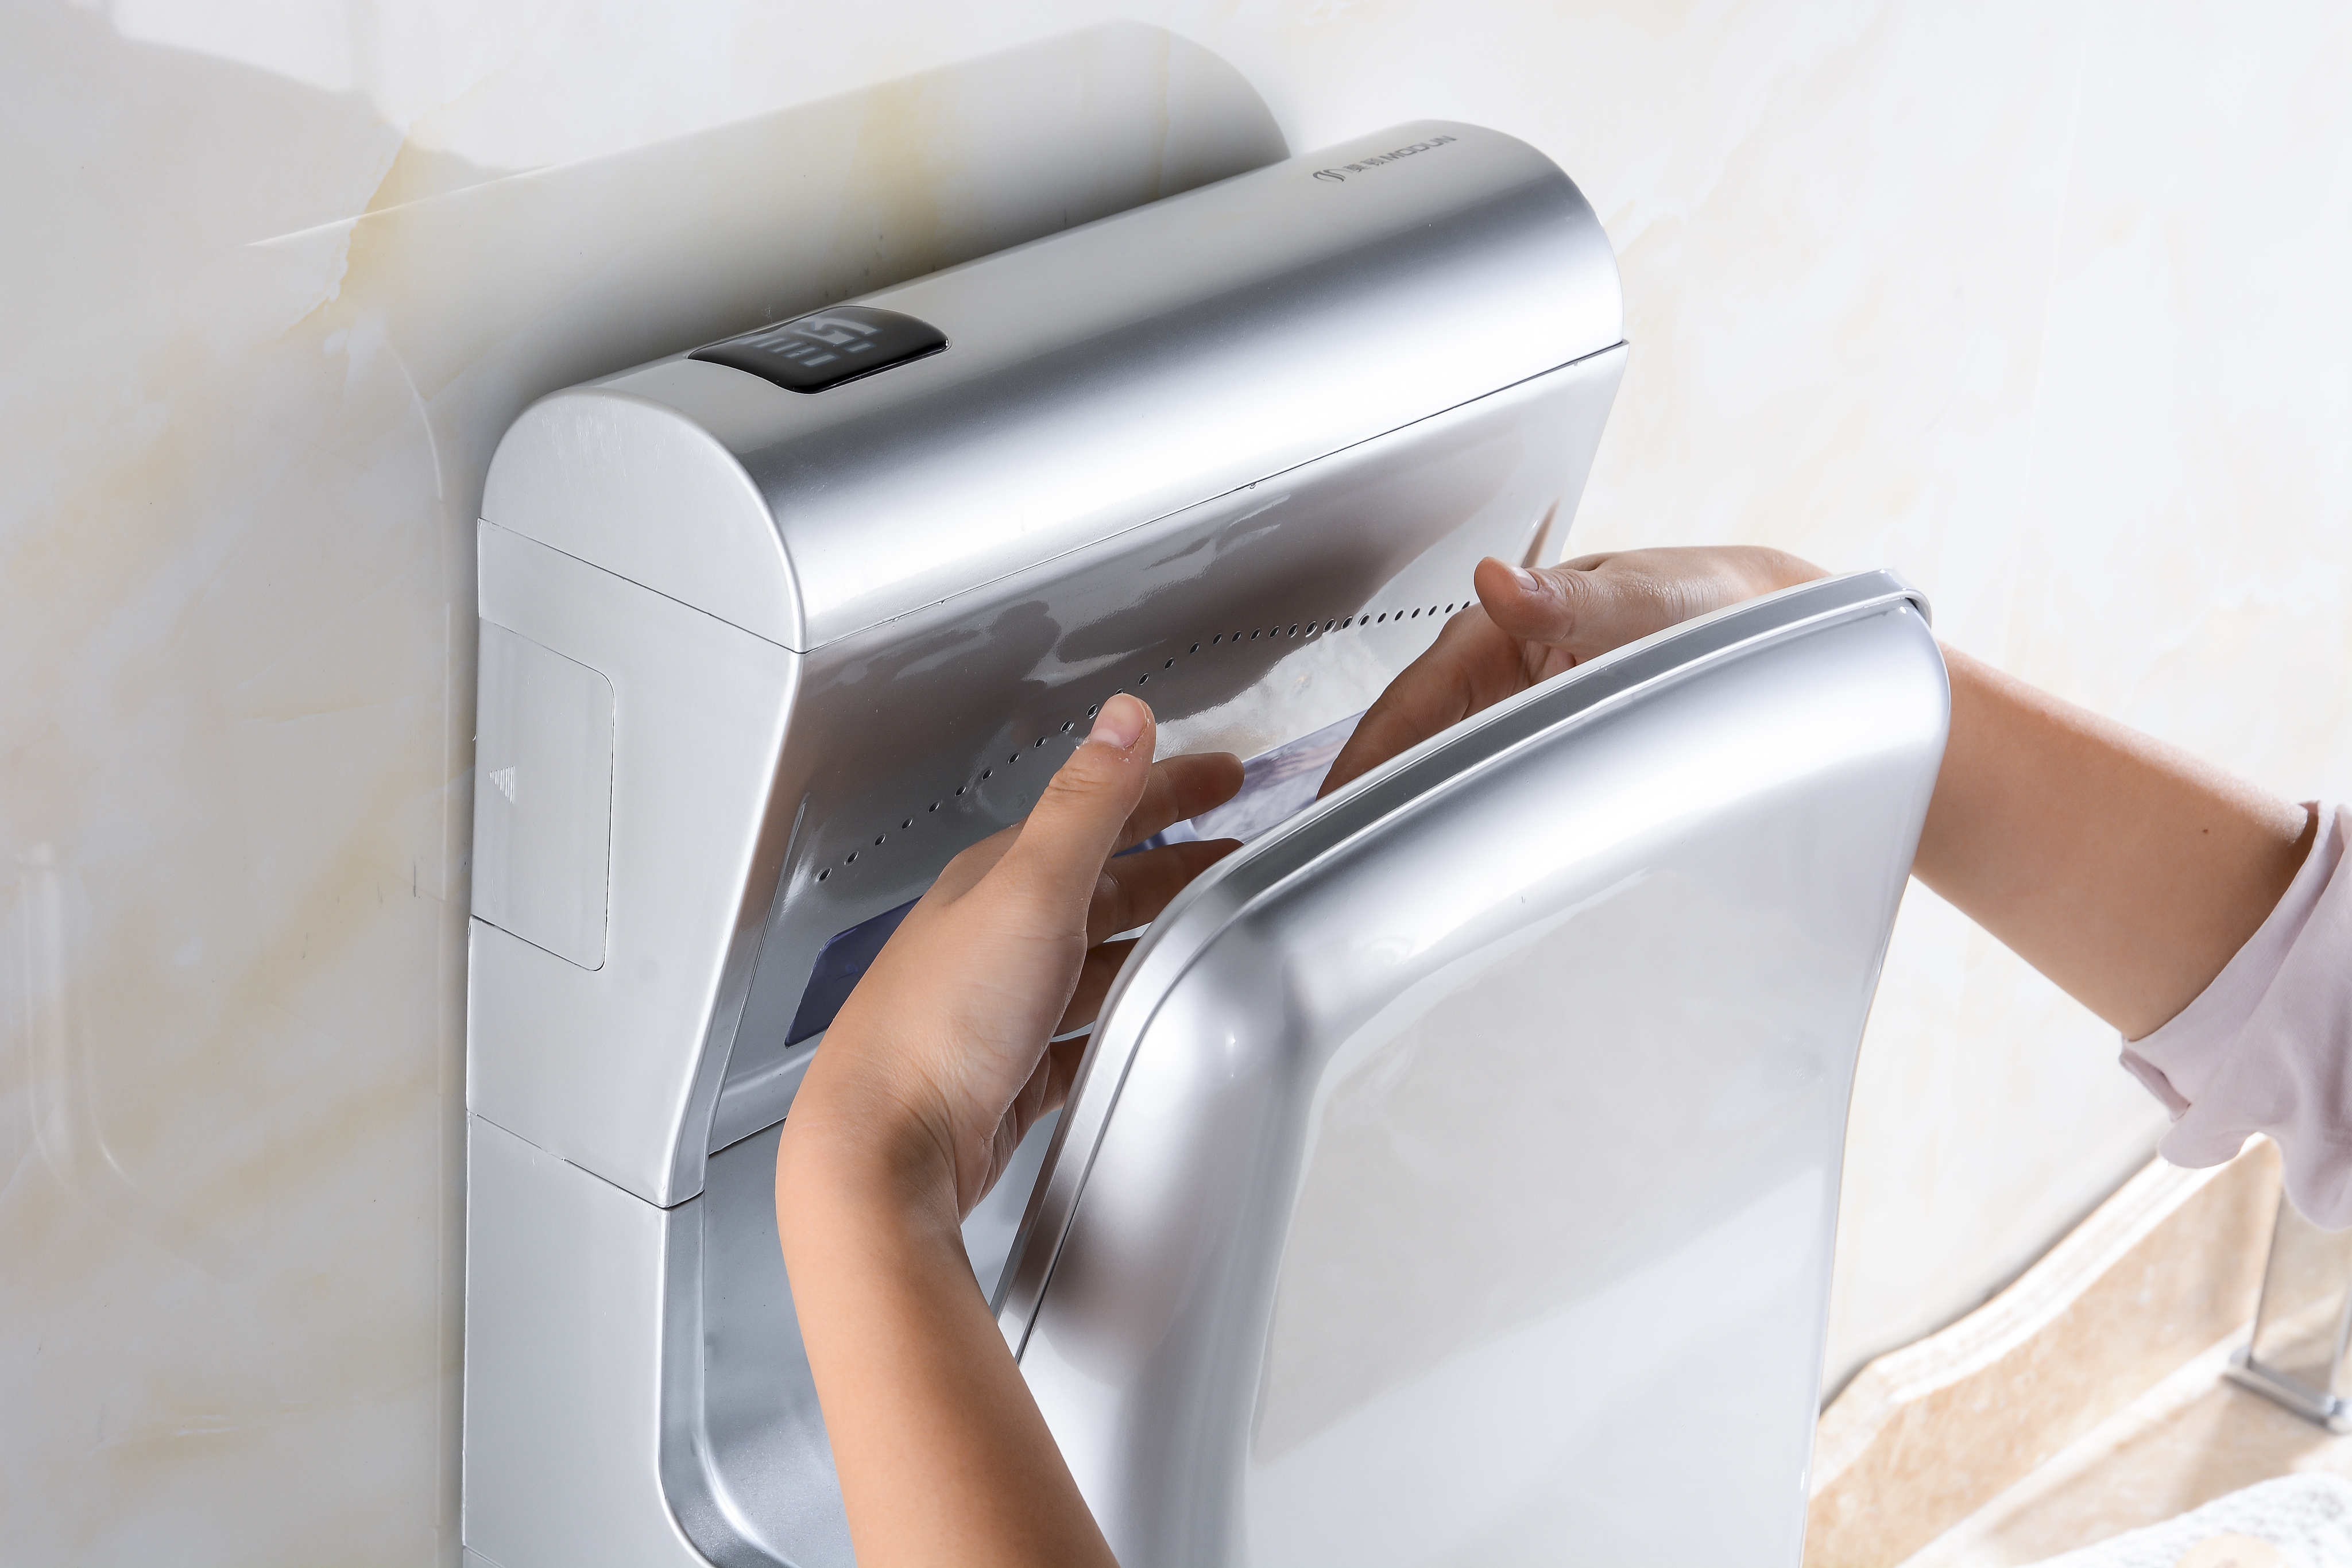 High Speed Plastic Automatic Hand Dryer